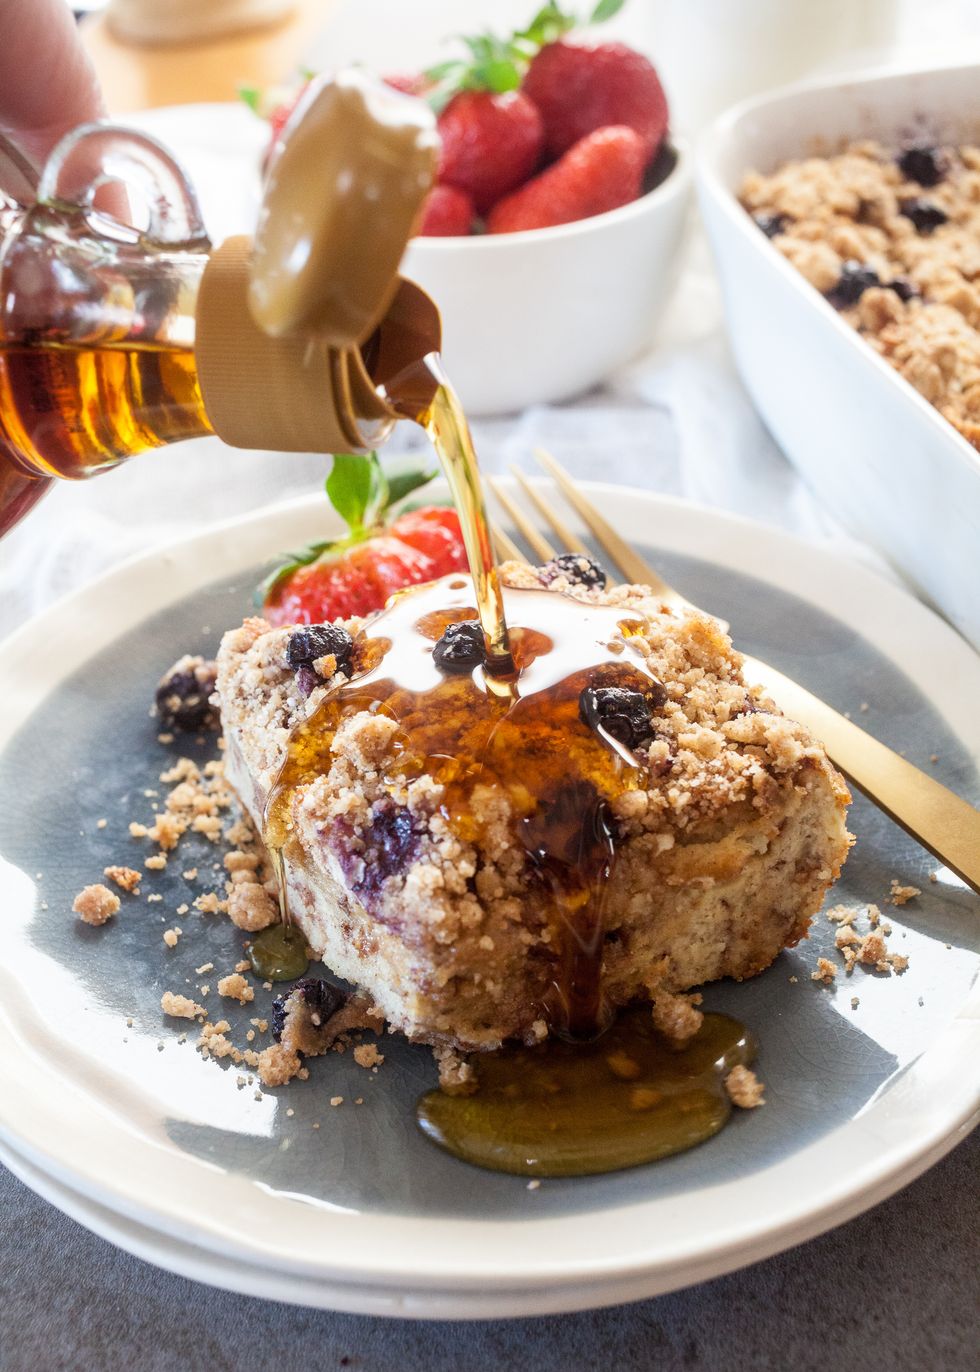 Blueberry Cinnamon Crumb Baked French Toast